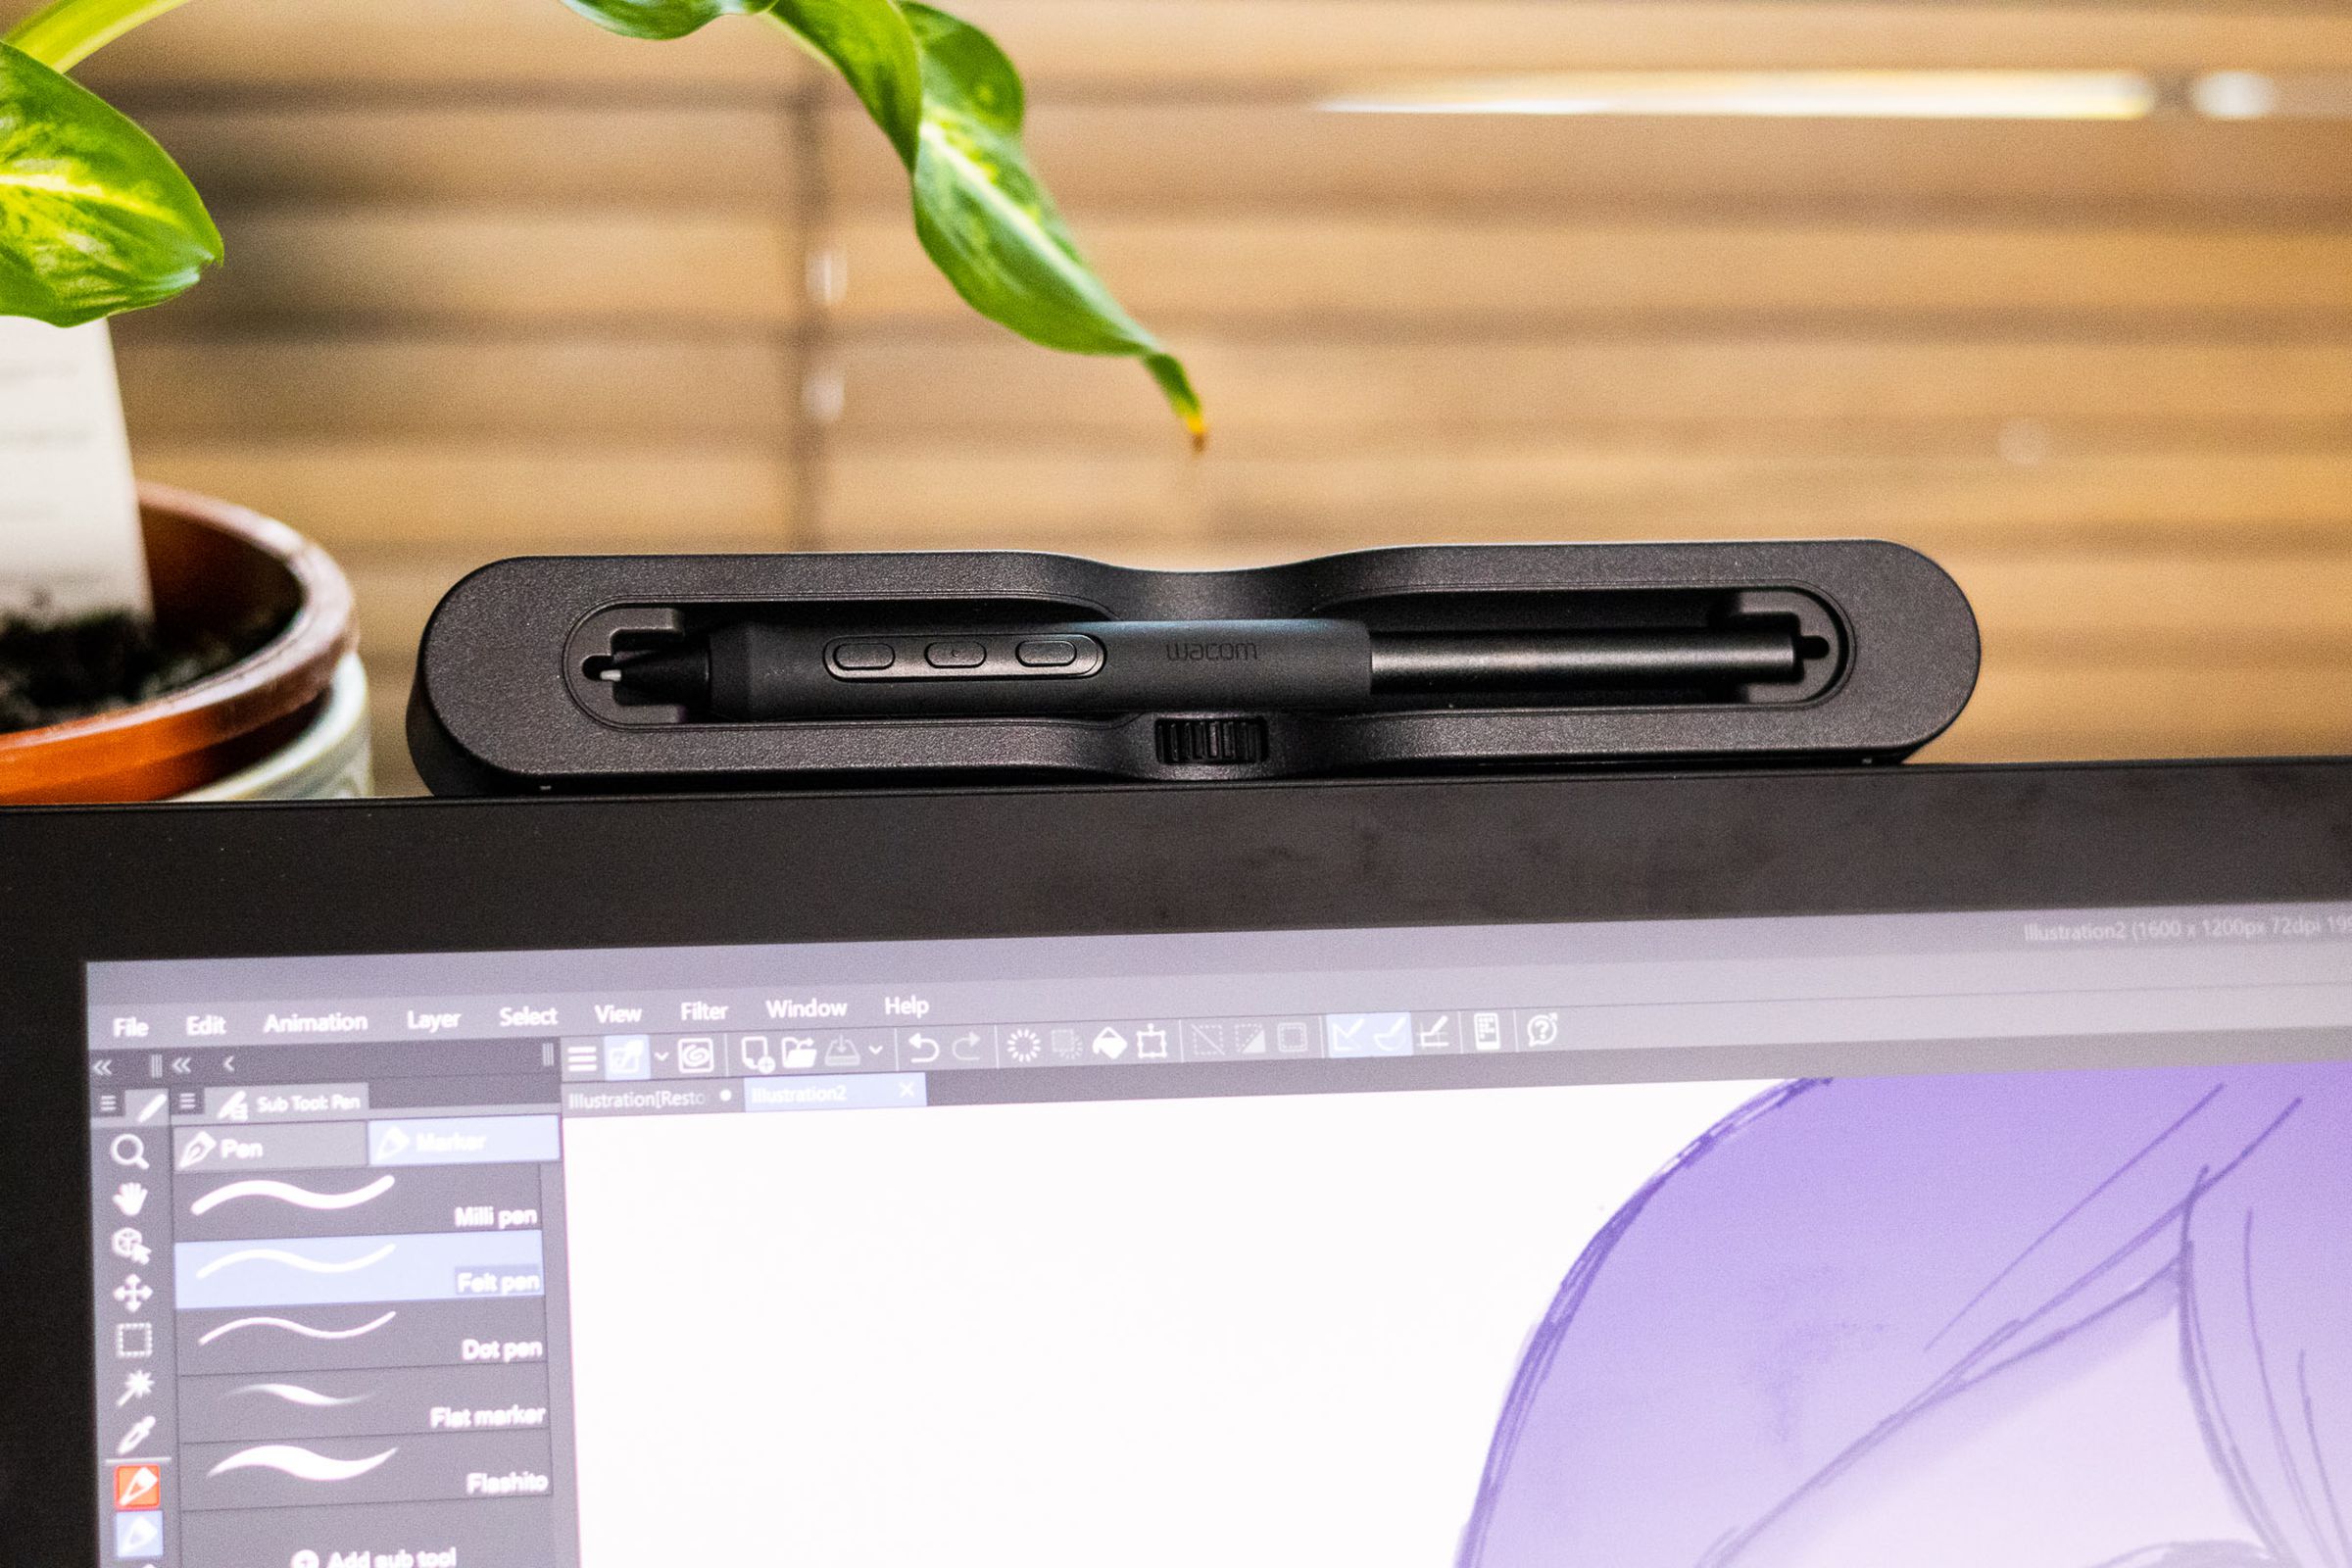 The Wacom Cintiq Pro 27 stylus holder attached to the top of the tablet.